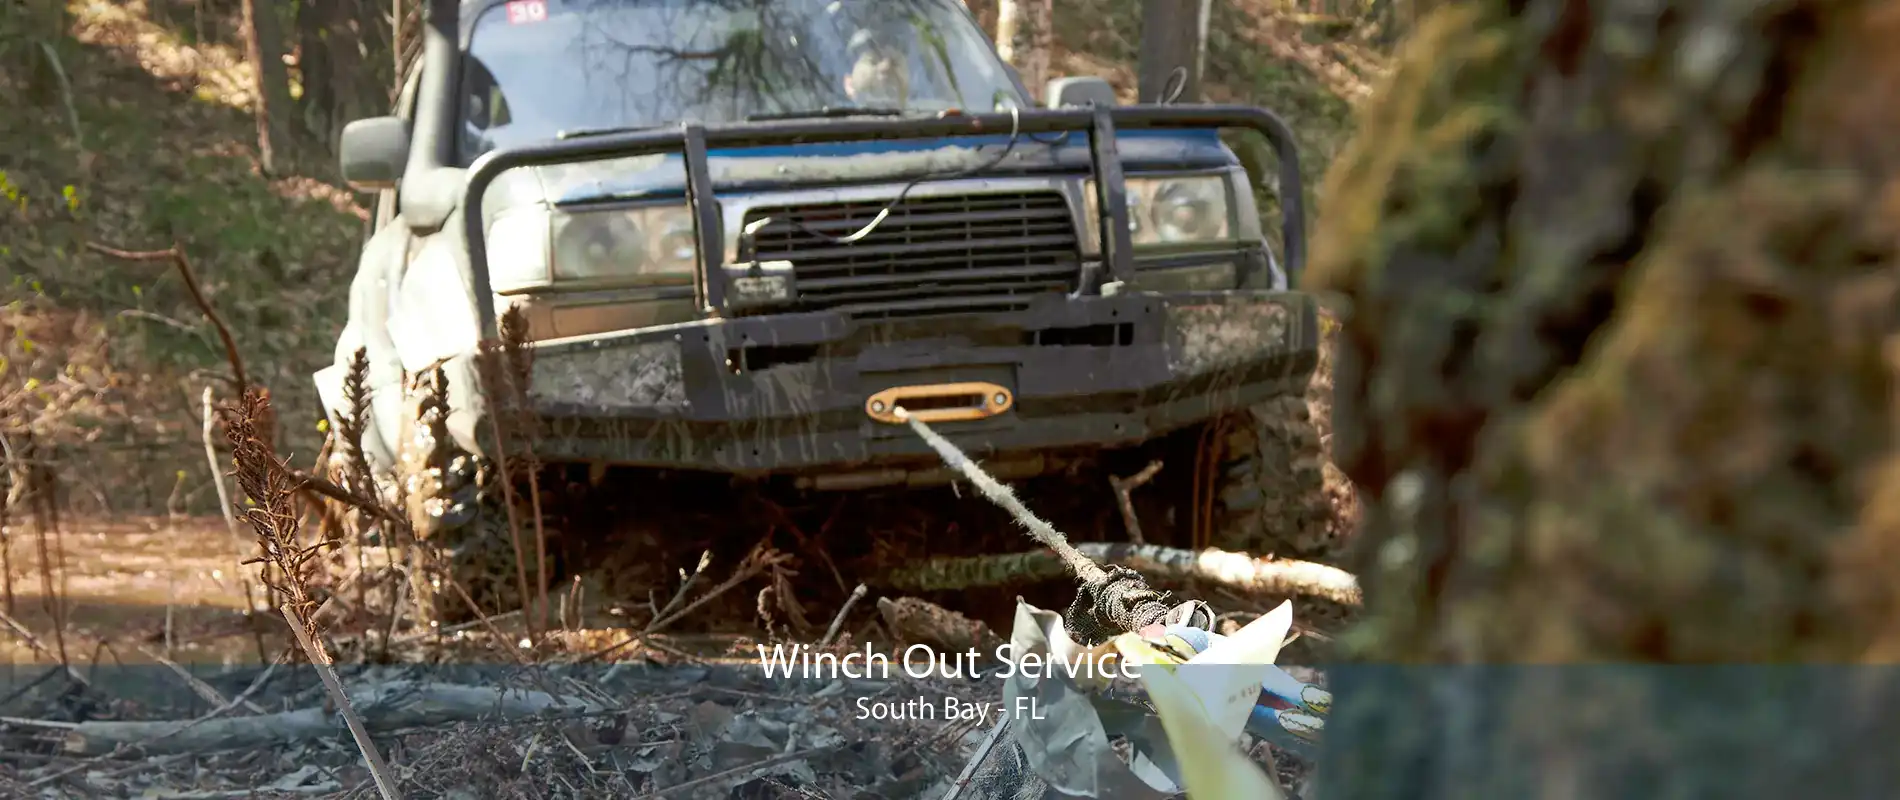 Winch Out Service South Bay - FL